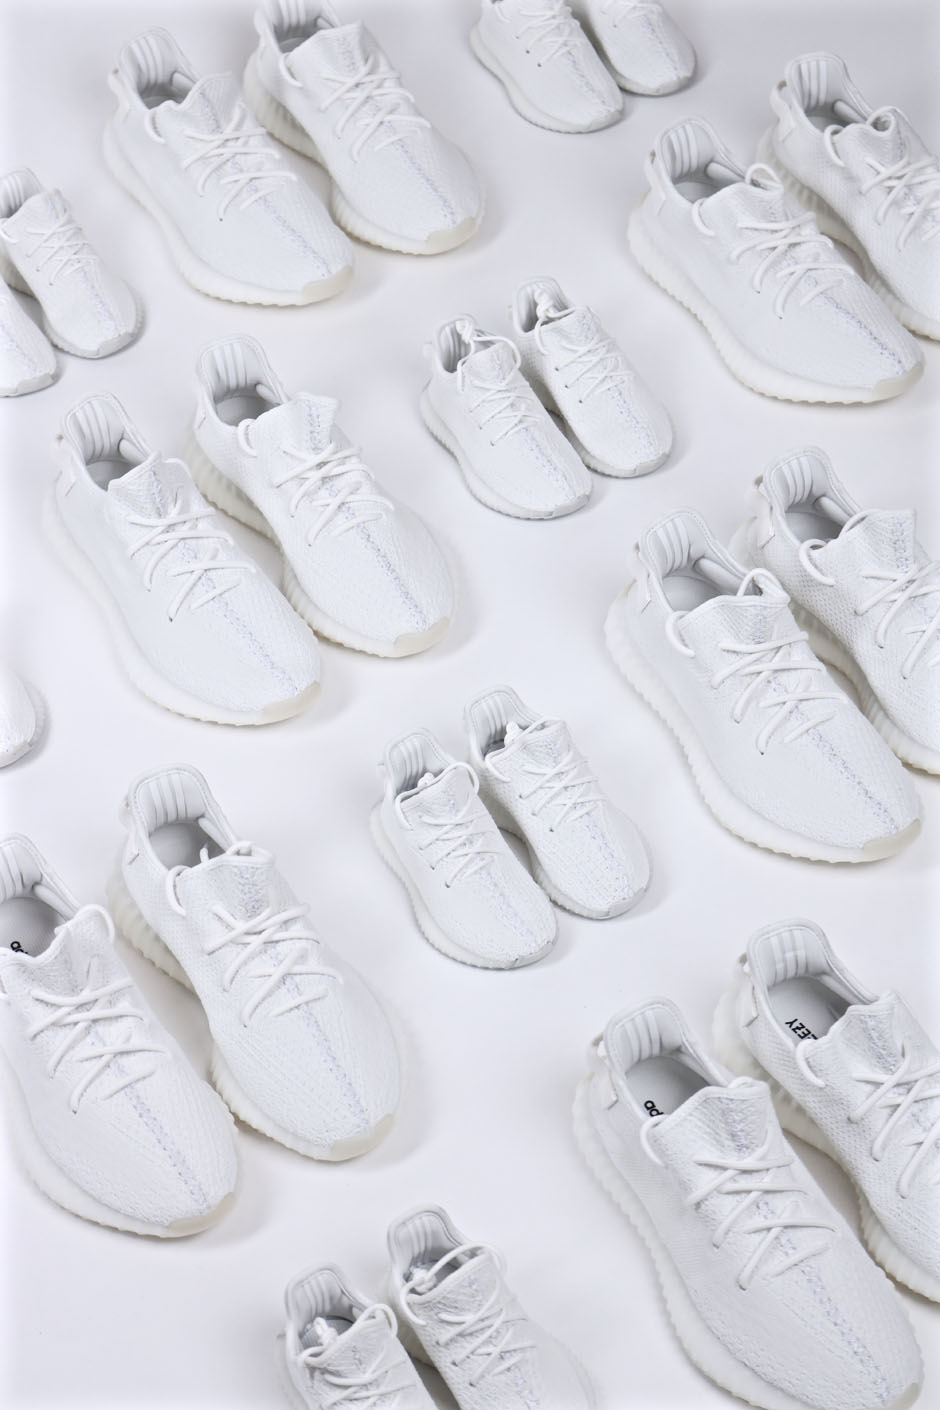 Kanye West's 'Cream White' Yeezy Boosts Get Covered in Doodles – Footwear  News